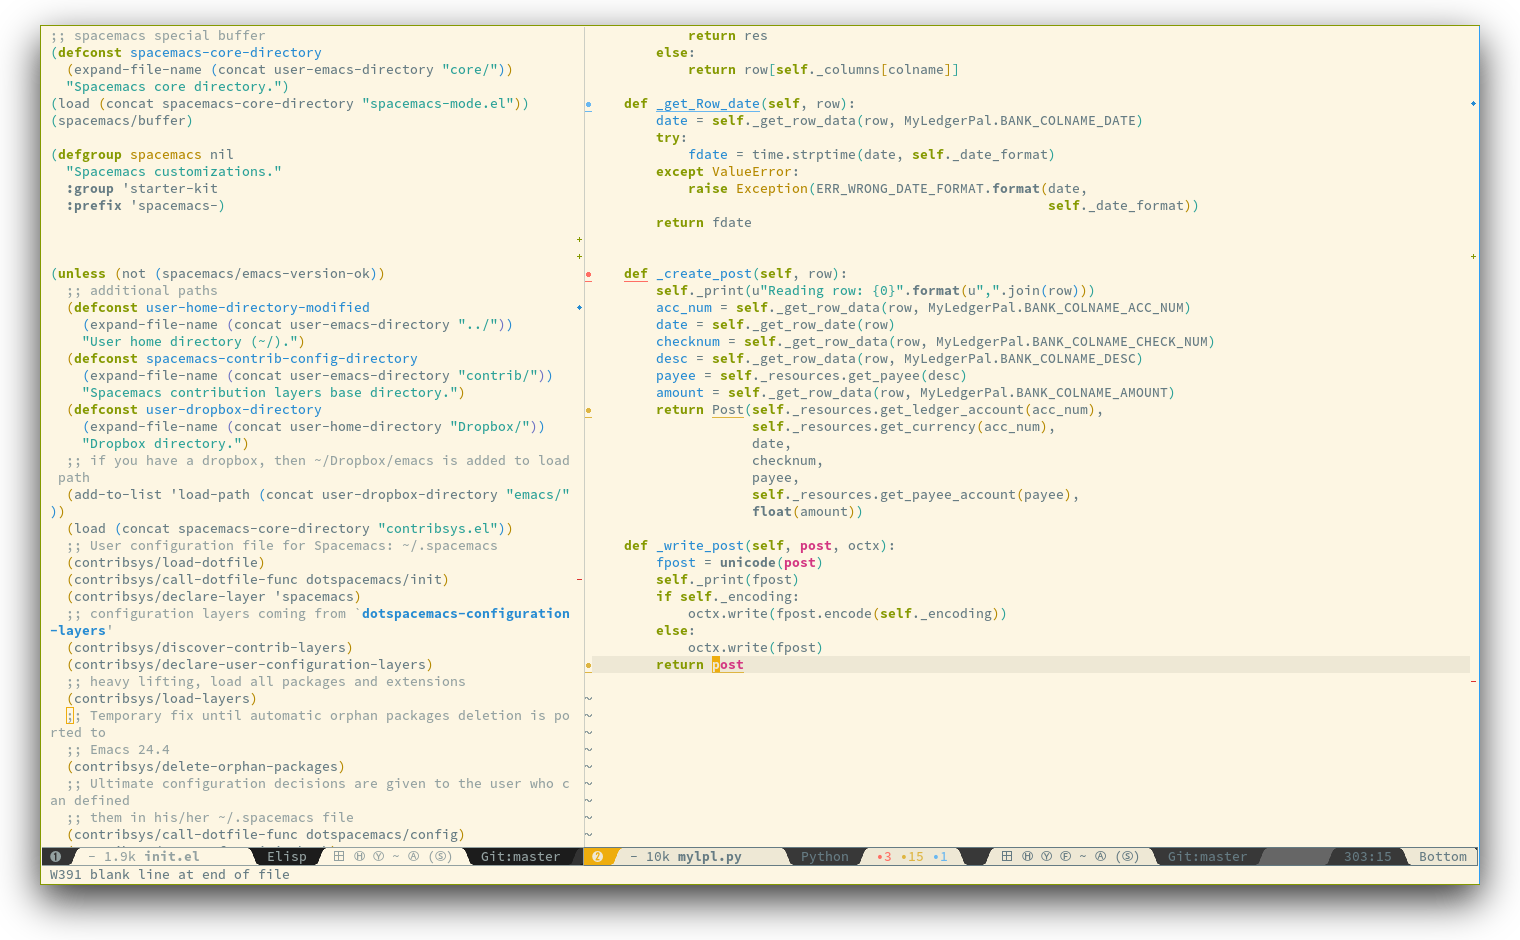 /TakeV/spacemacs/media/commit/ad7d310883fafbbf8e25054d5d8277d282874981/doc/img/spacemacs-python.png